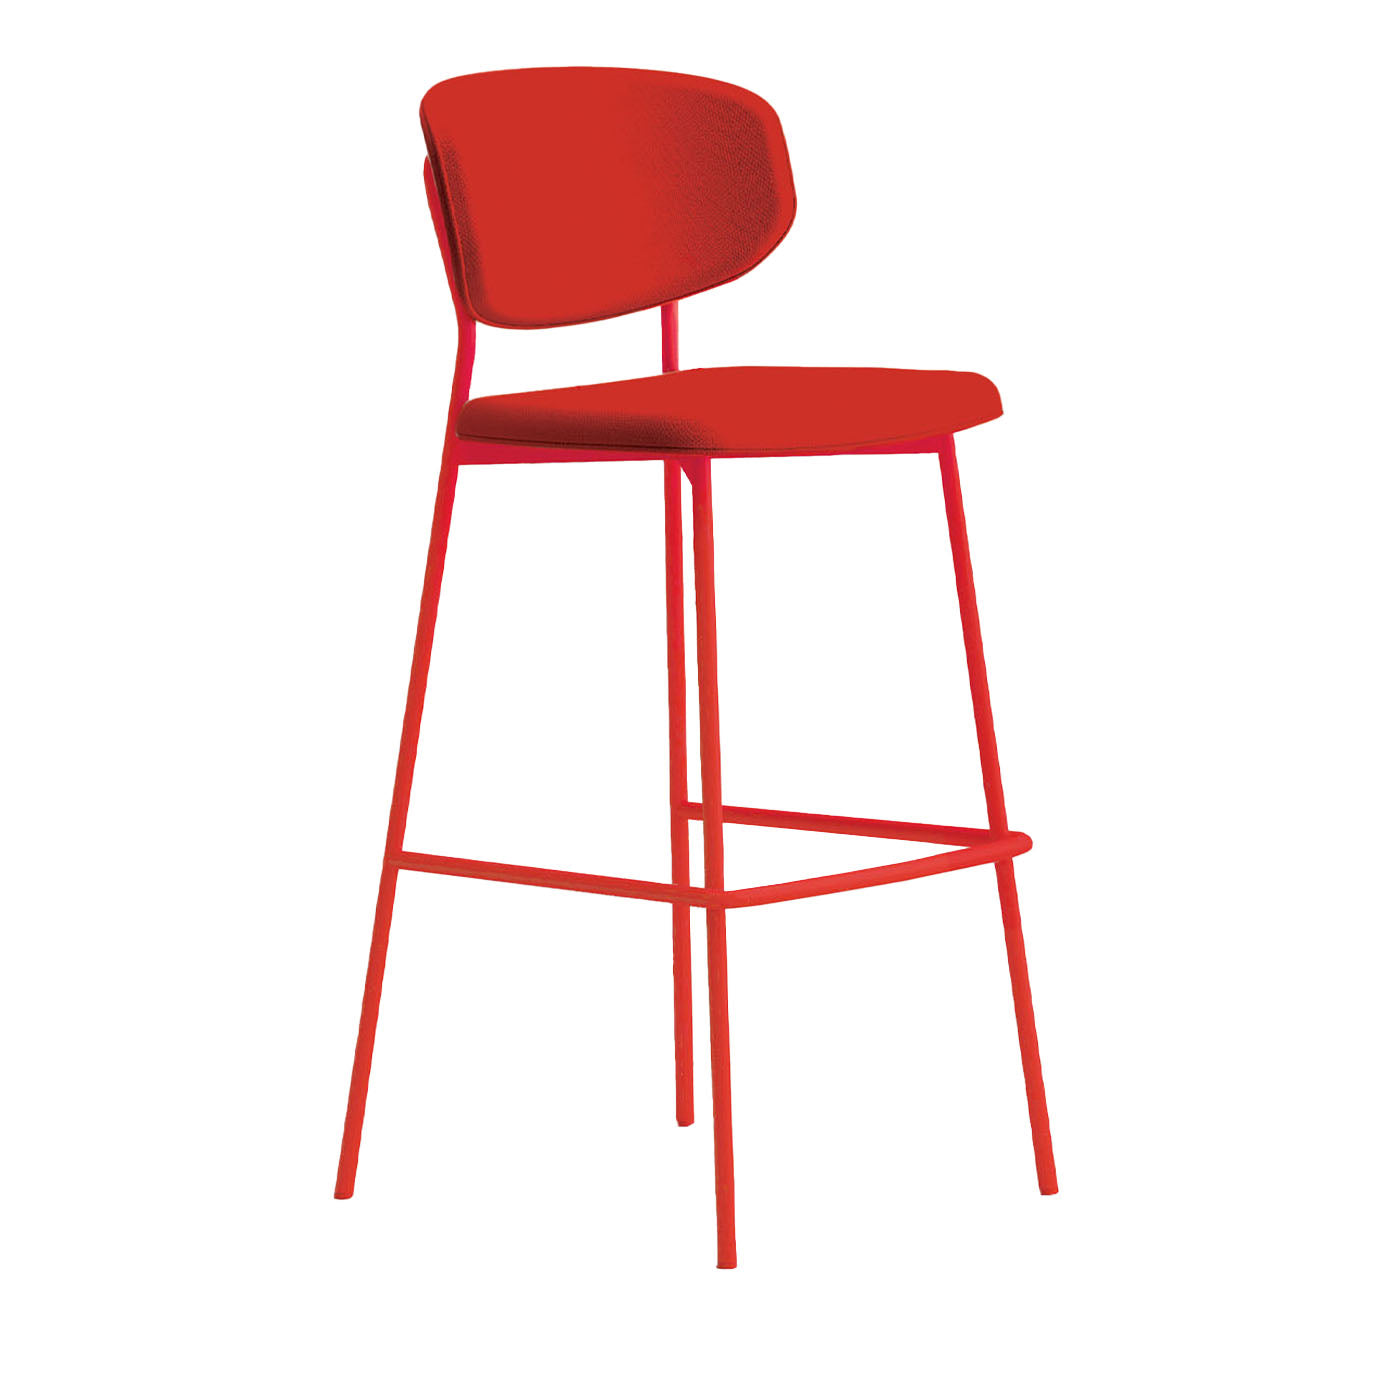 Wround Red Stool by Copiosa Lab - Main view